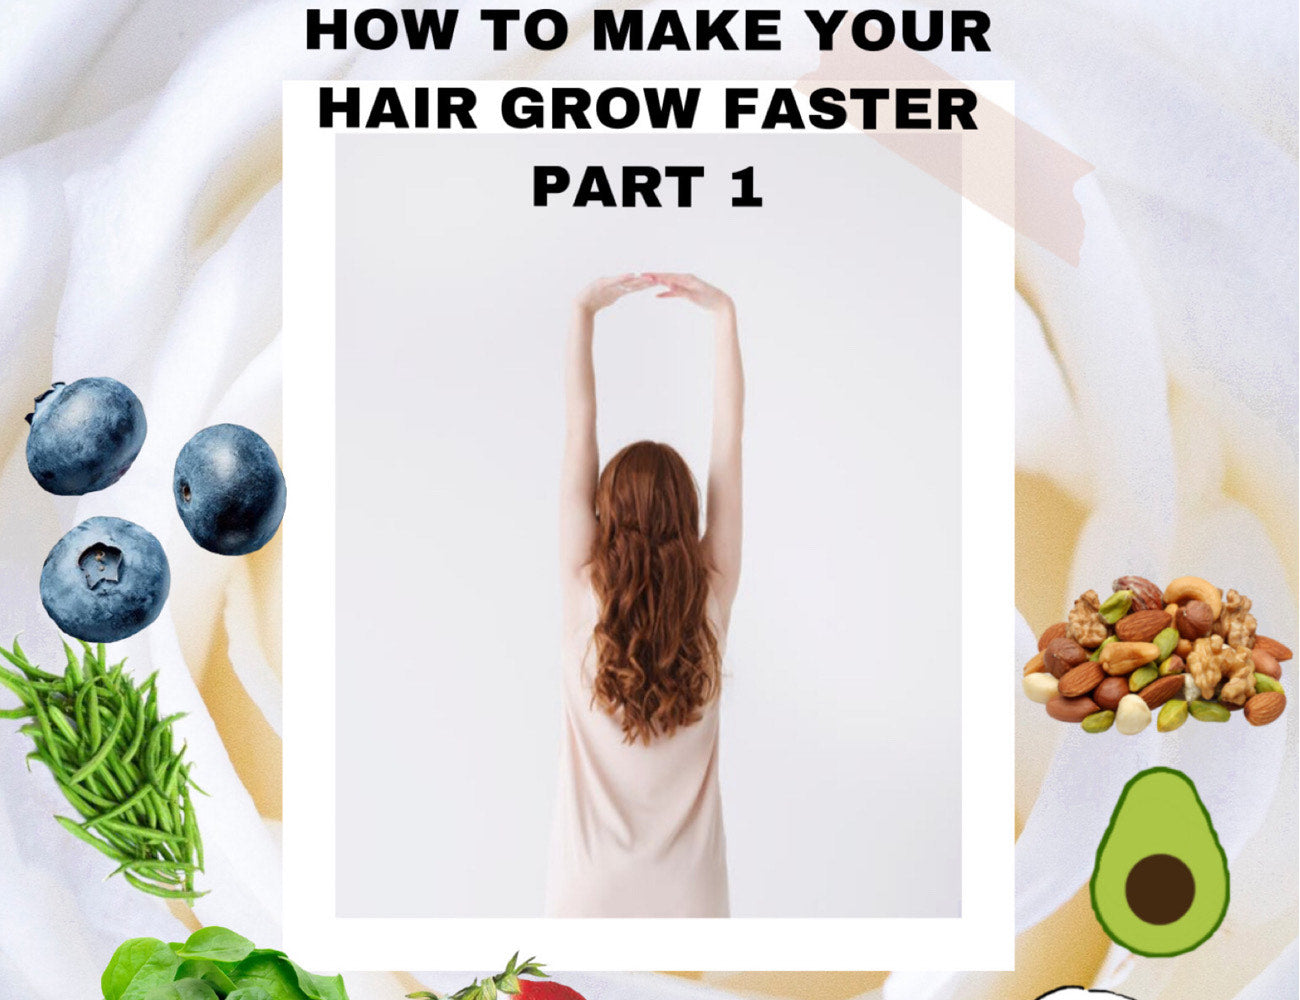 How To Make Your Hair Grow Faster Part 1